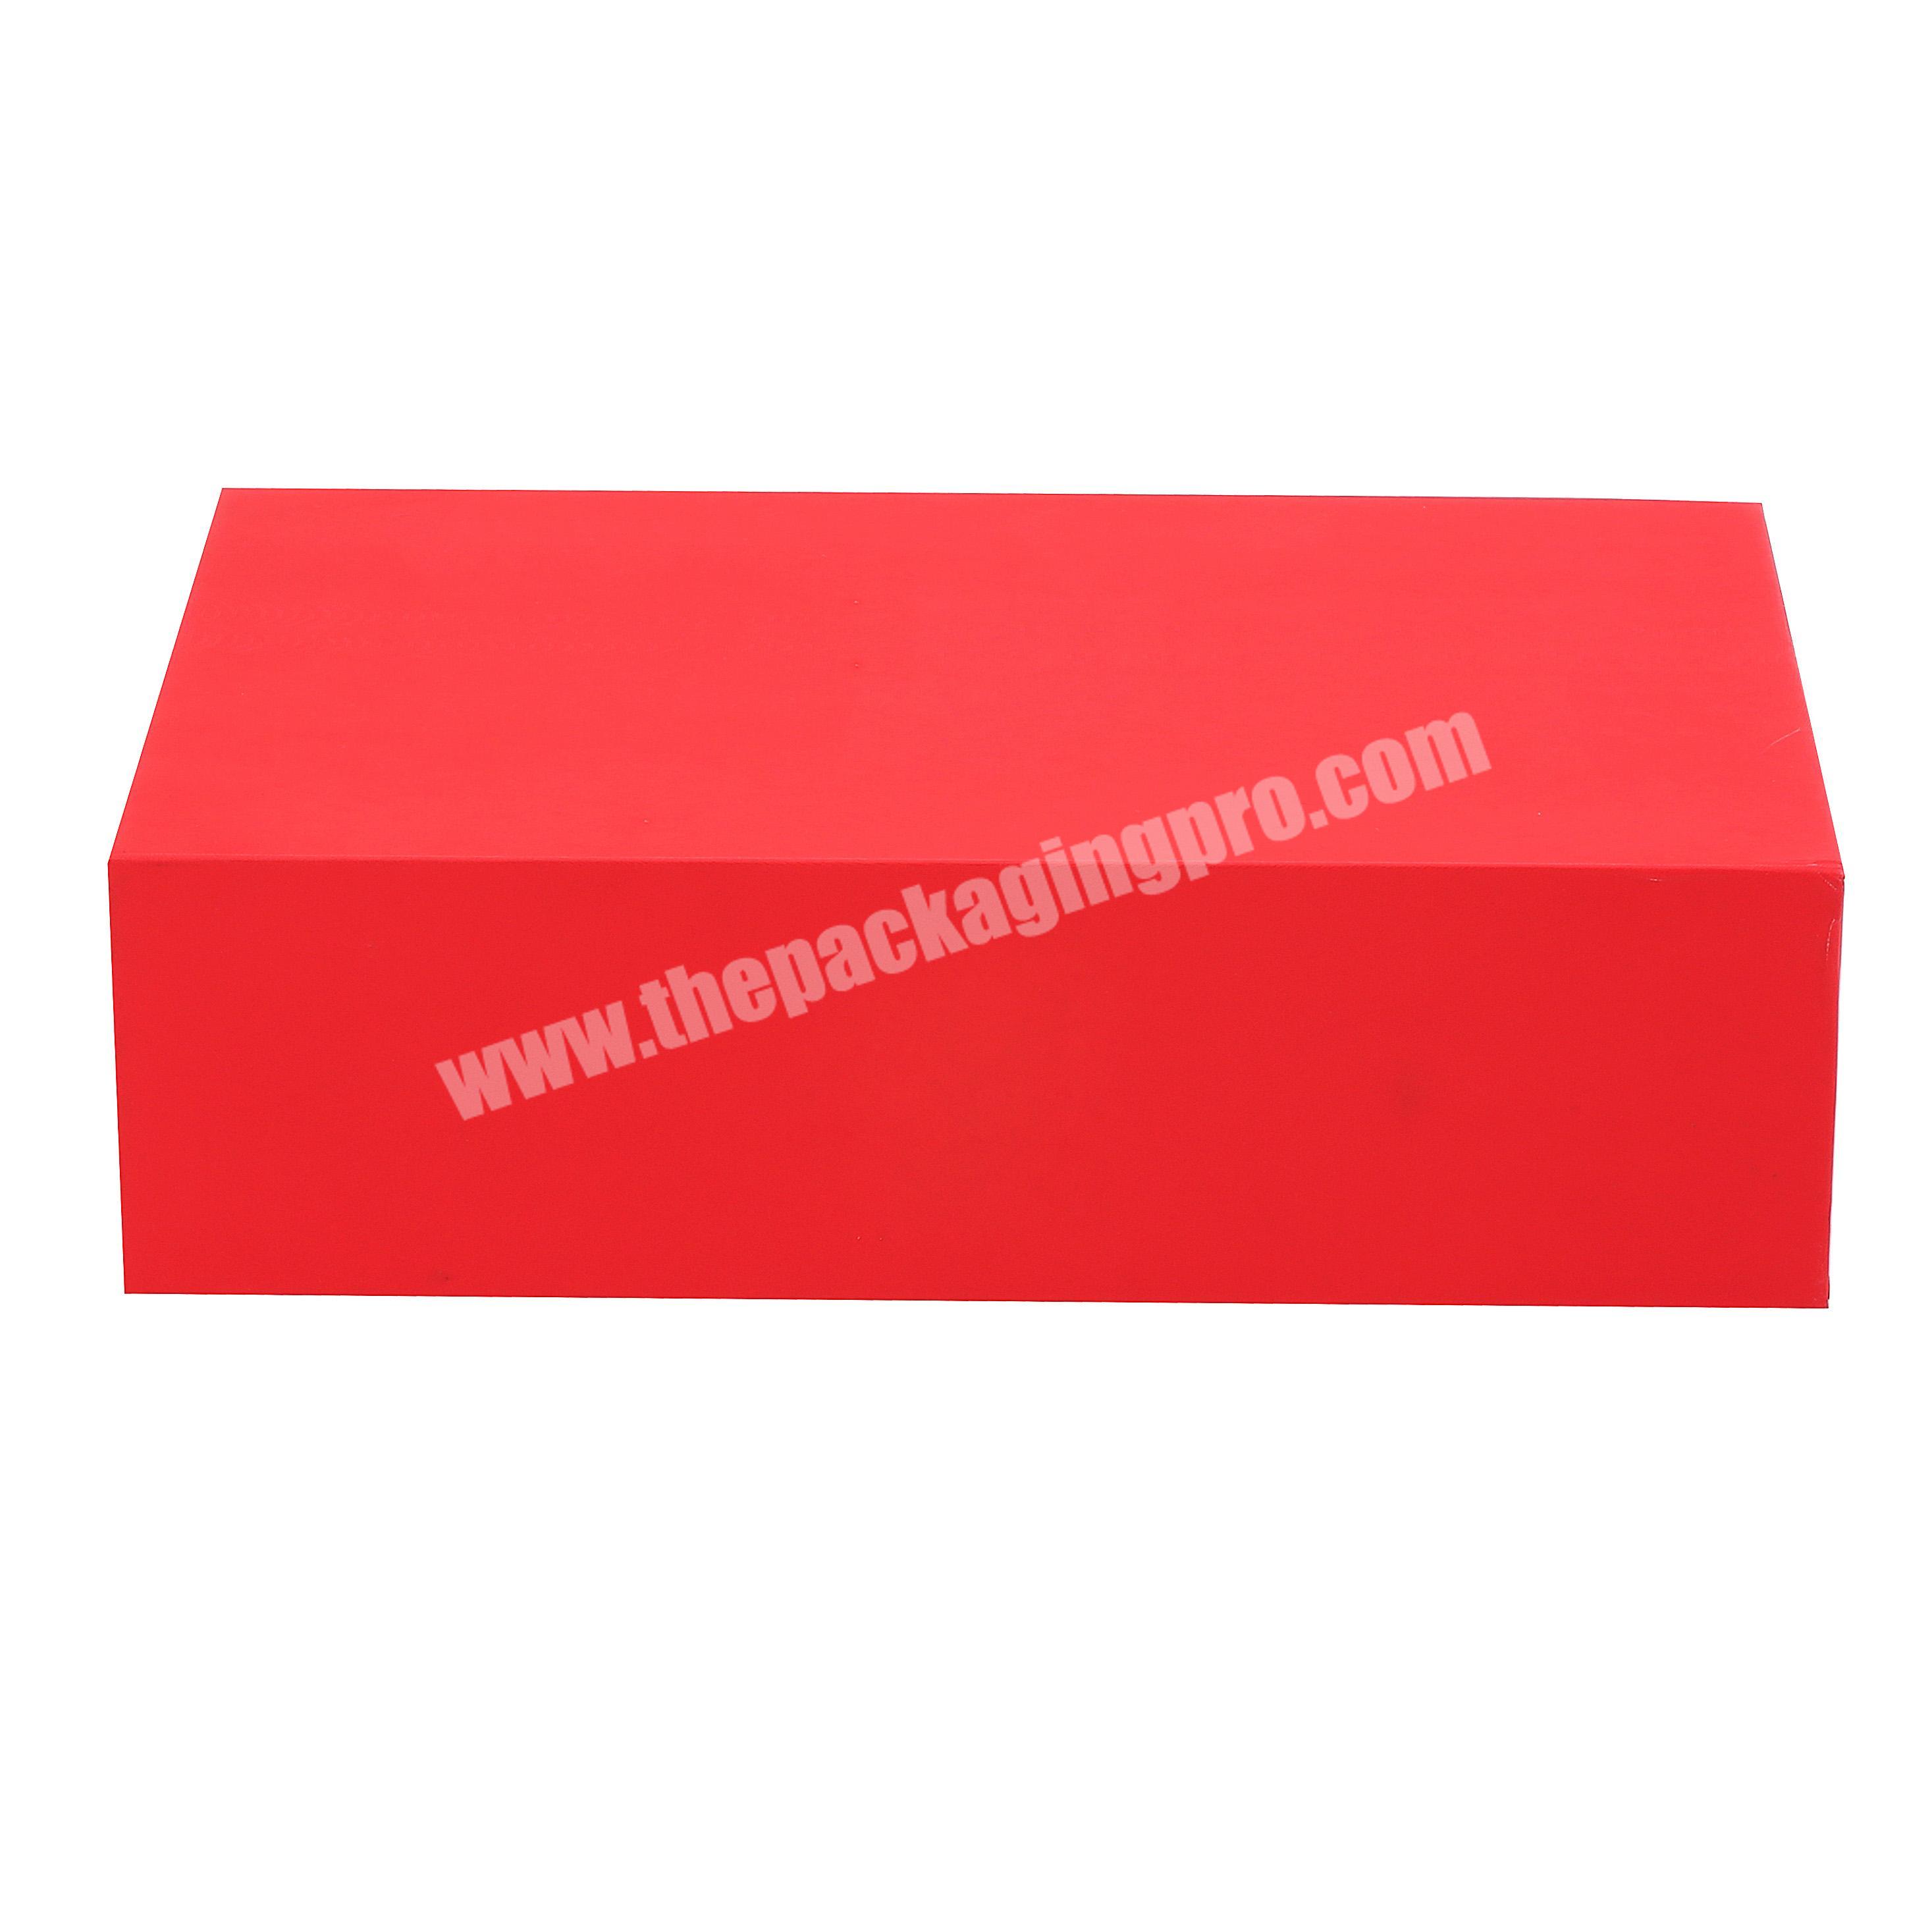 Set Up Paper Packaging Box book style box with vac tray inside